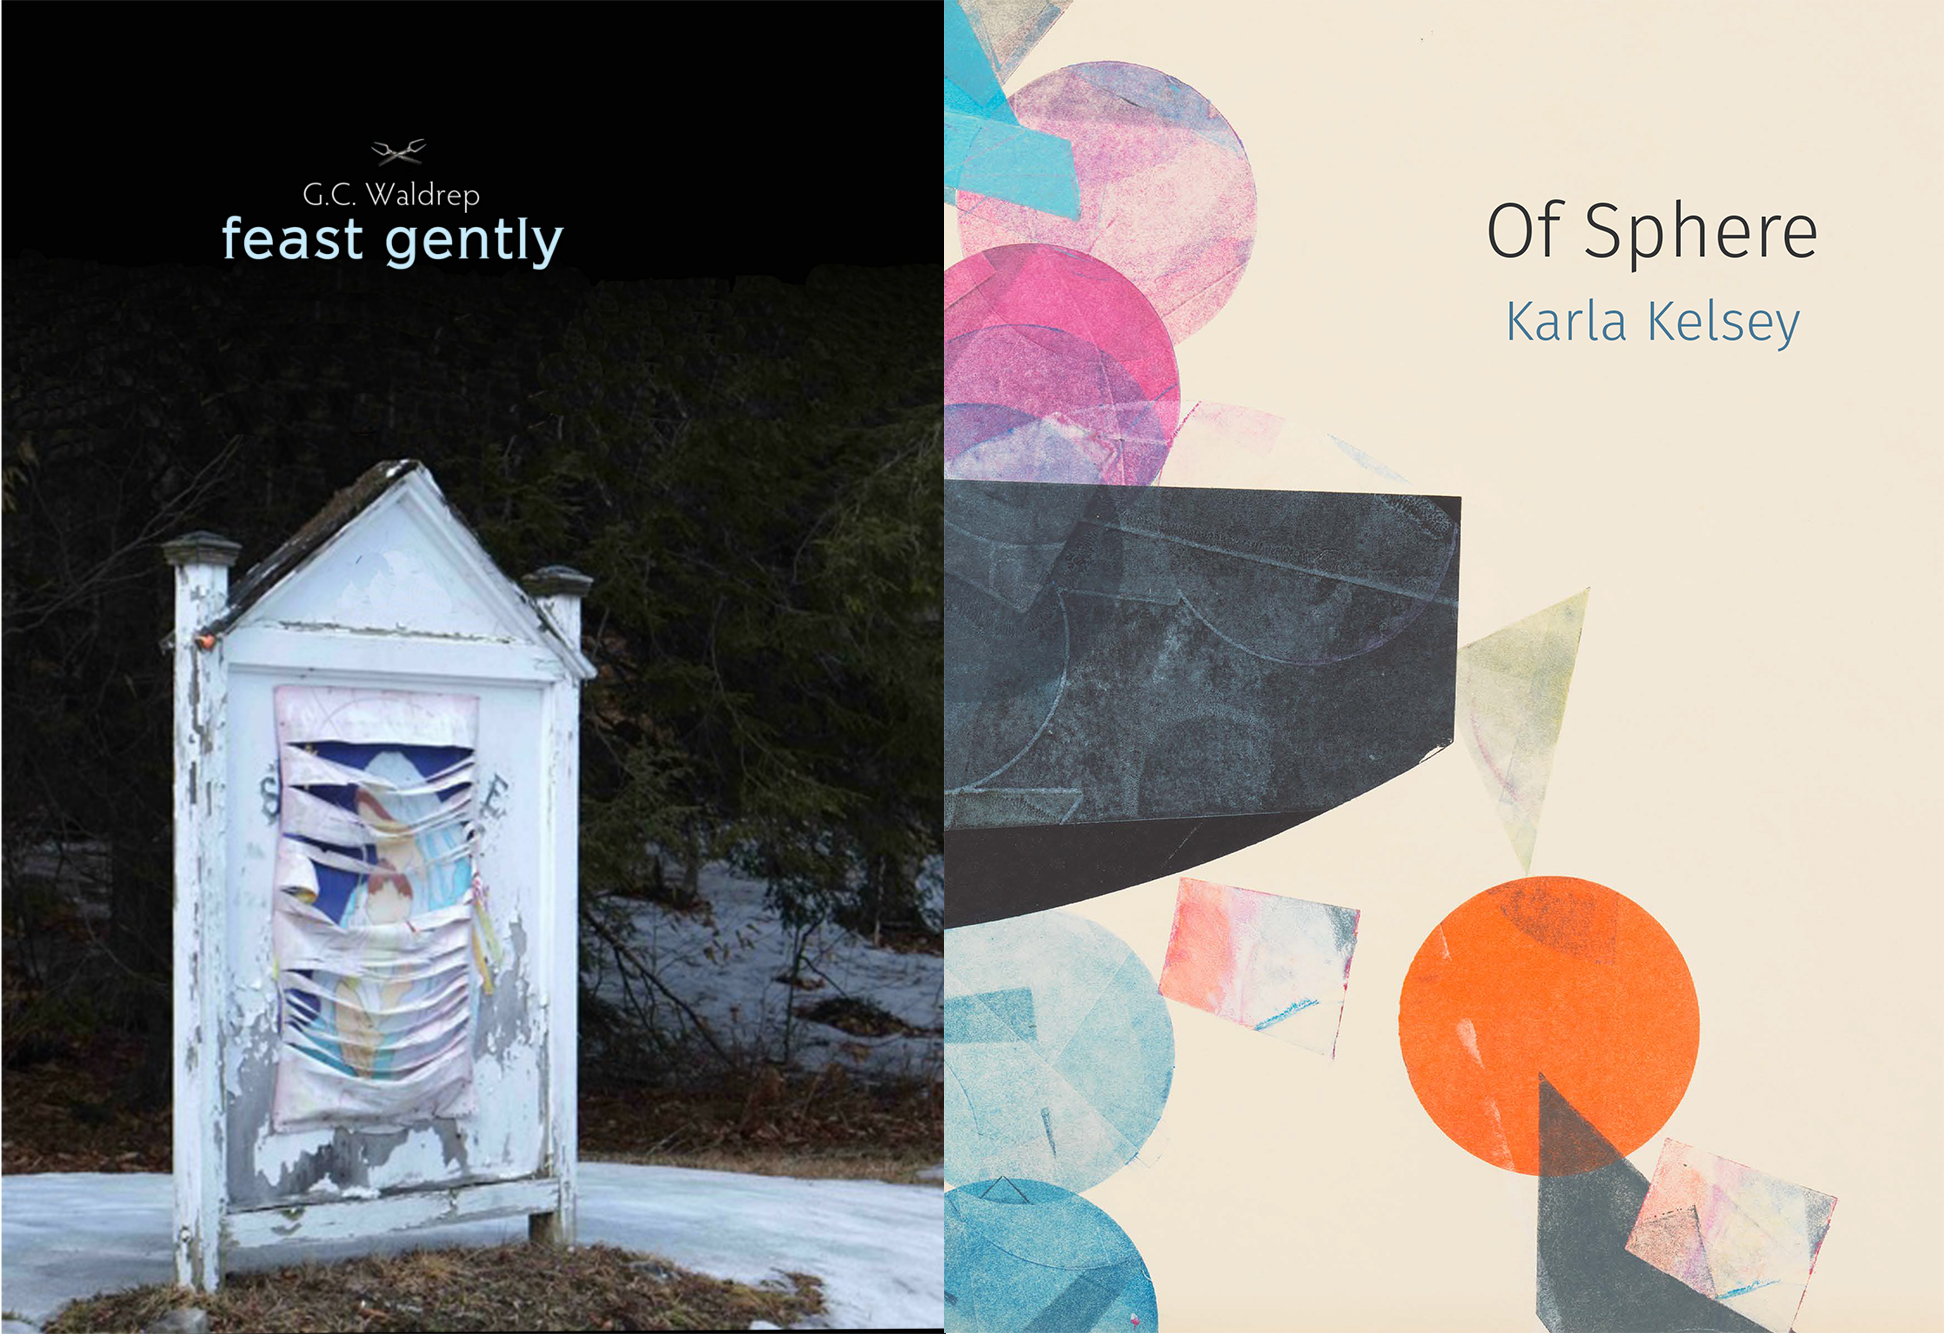 book covers for  Feast Gently and Of Sphere